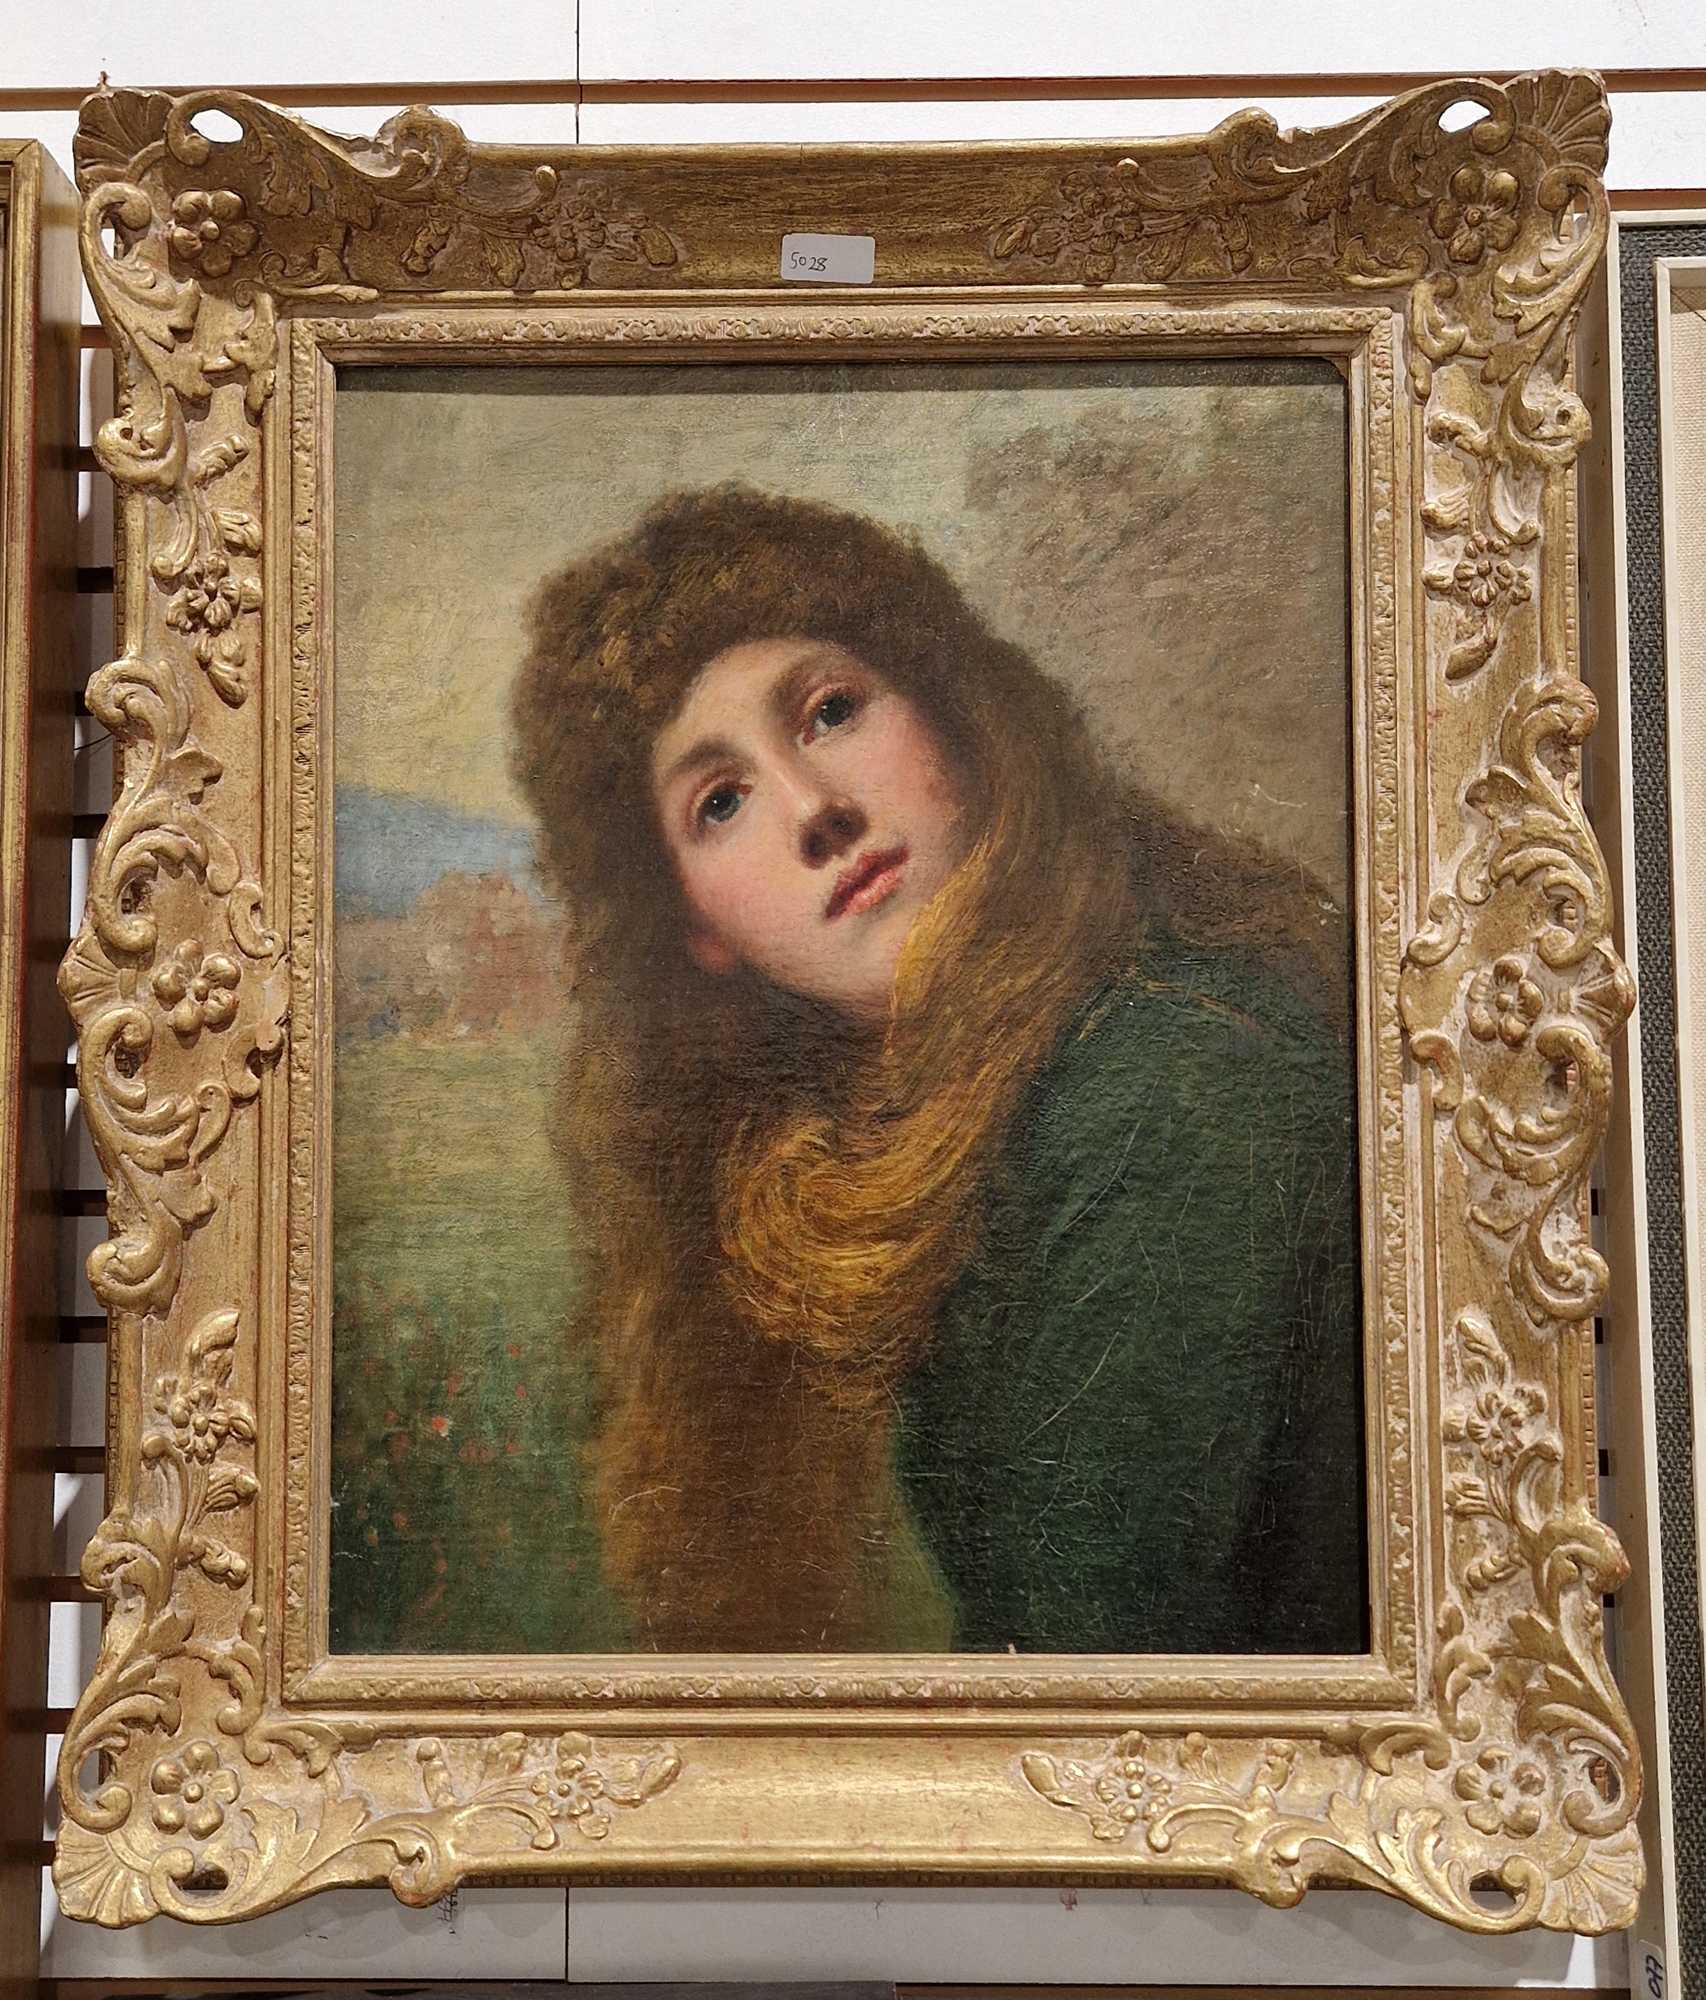 Late 19th century British School Oil on canvas Portrait of a young woman with windswept red hair - Image 2 of 24